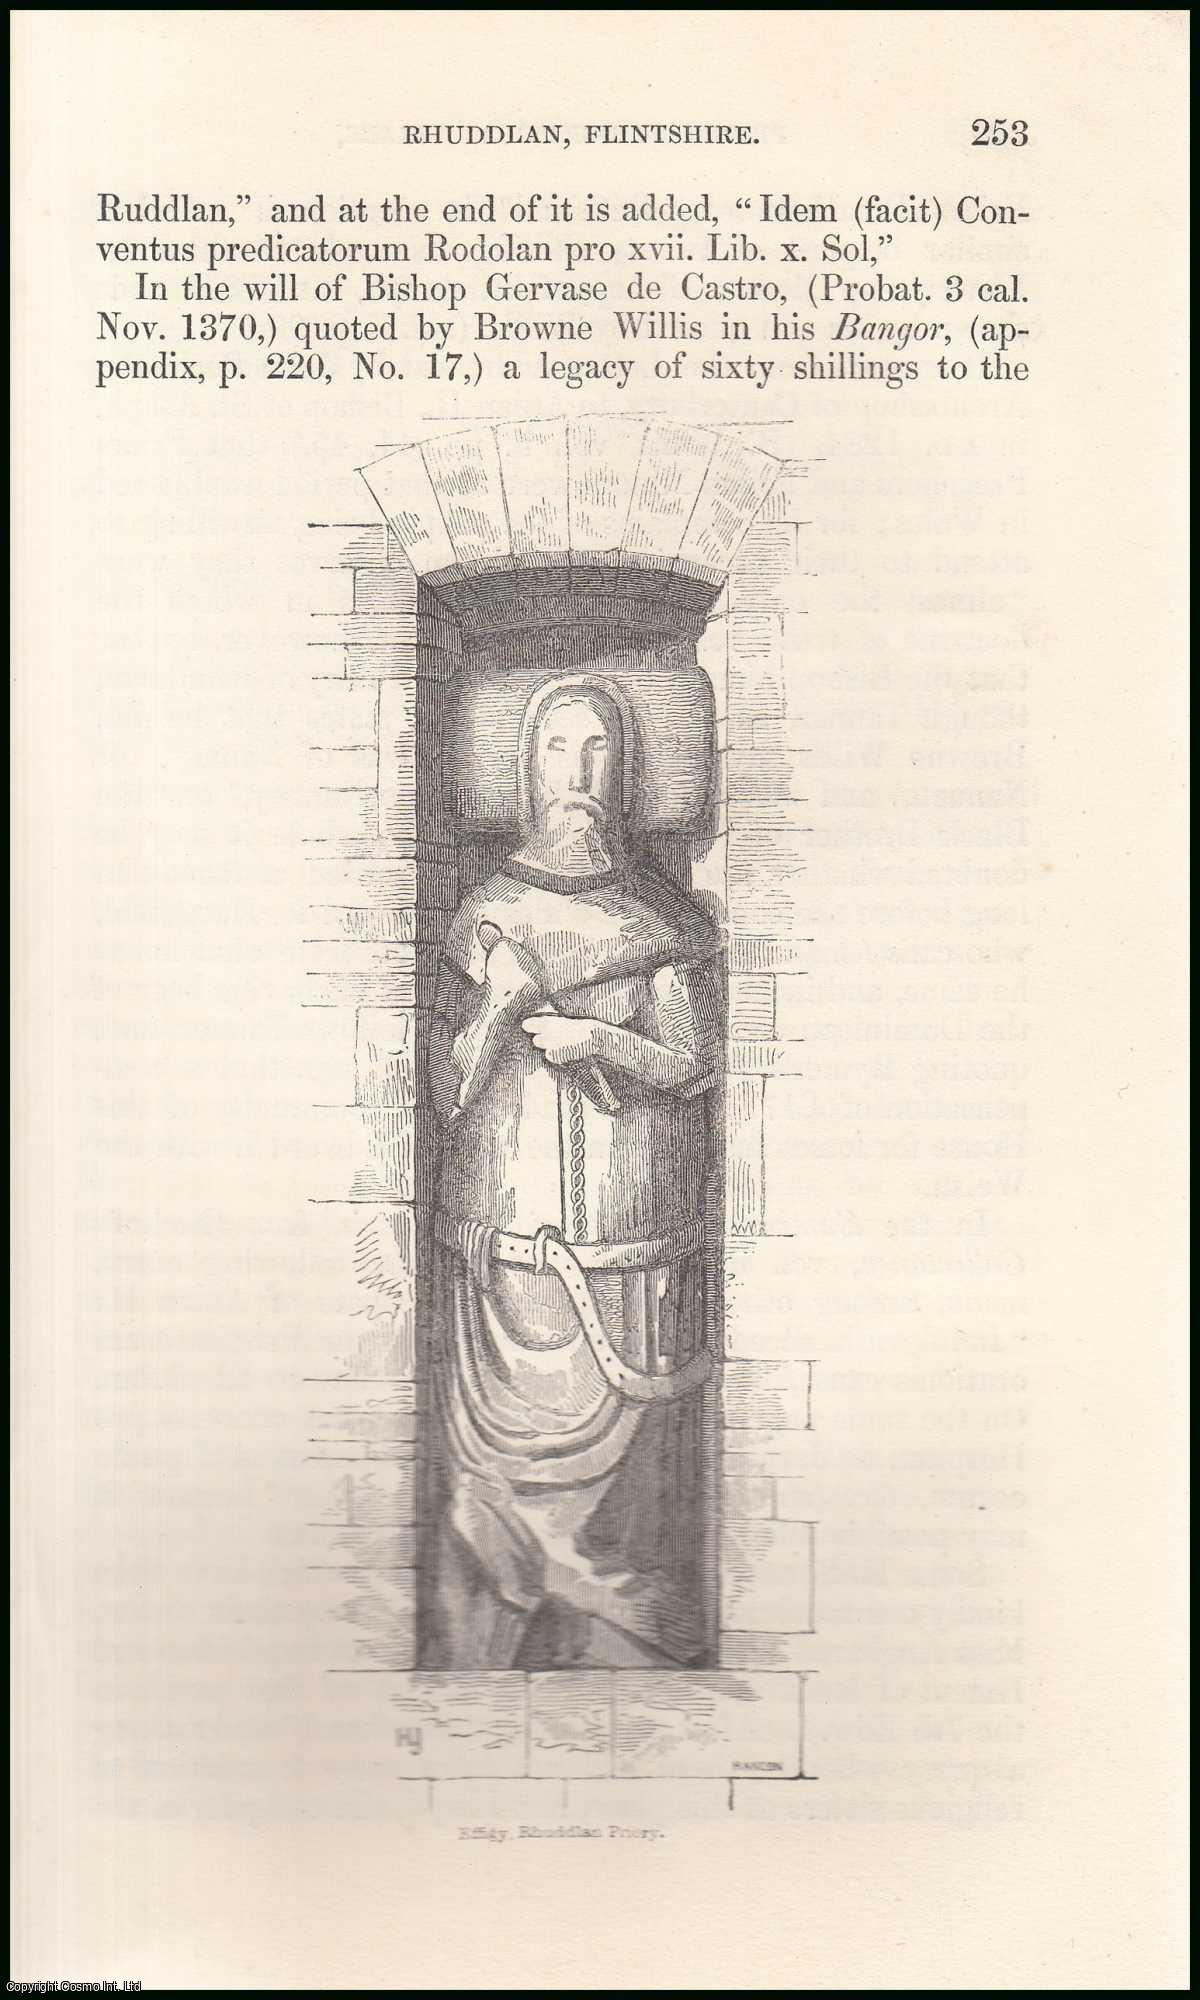 H.L.J. - Priory of Dominican Friars, Rhuddlan, Flintshire. An original article from the Archaeologia Cambrensis, a Record of The Antiquities of Wales & its Marches, 1847.